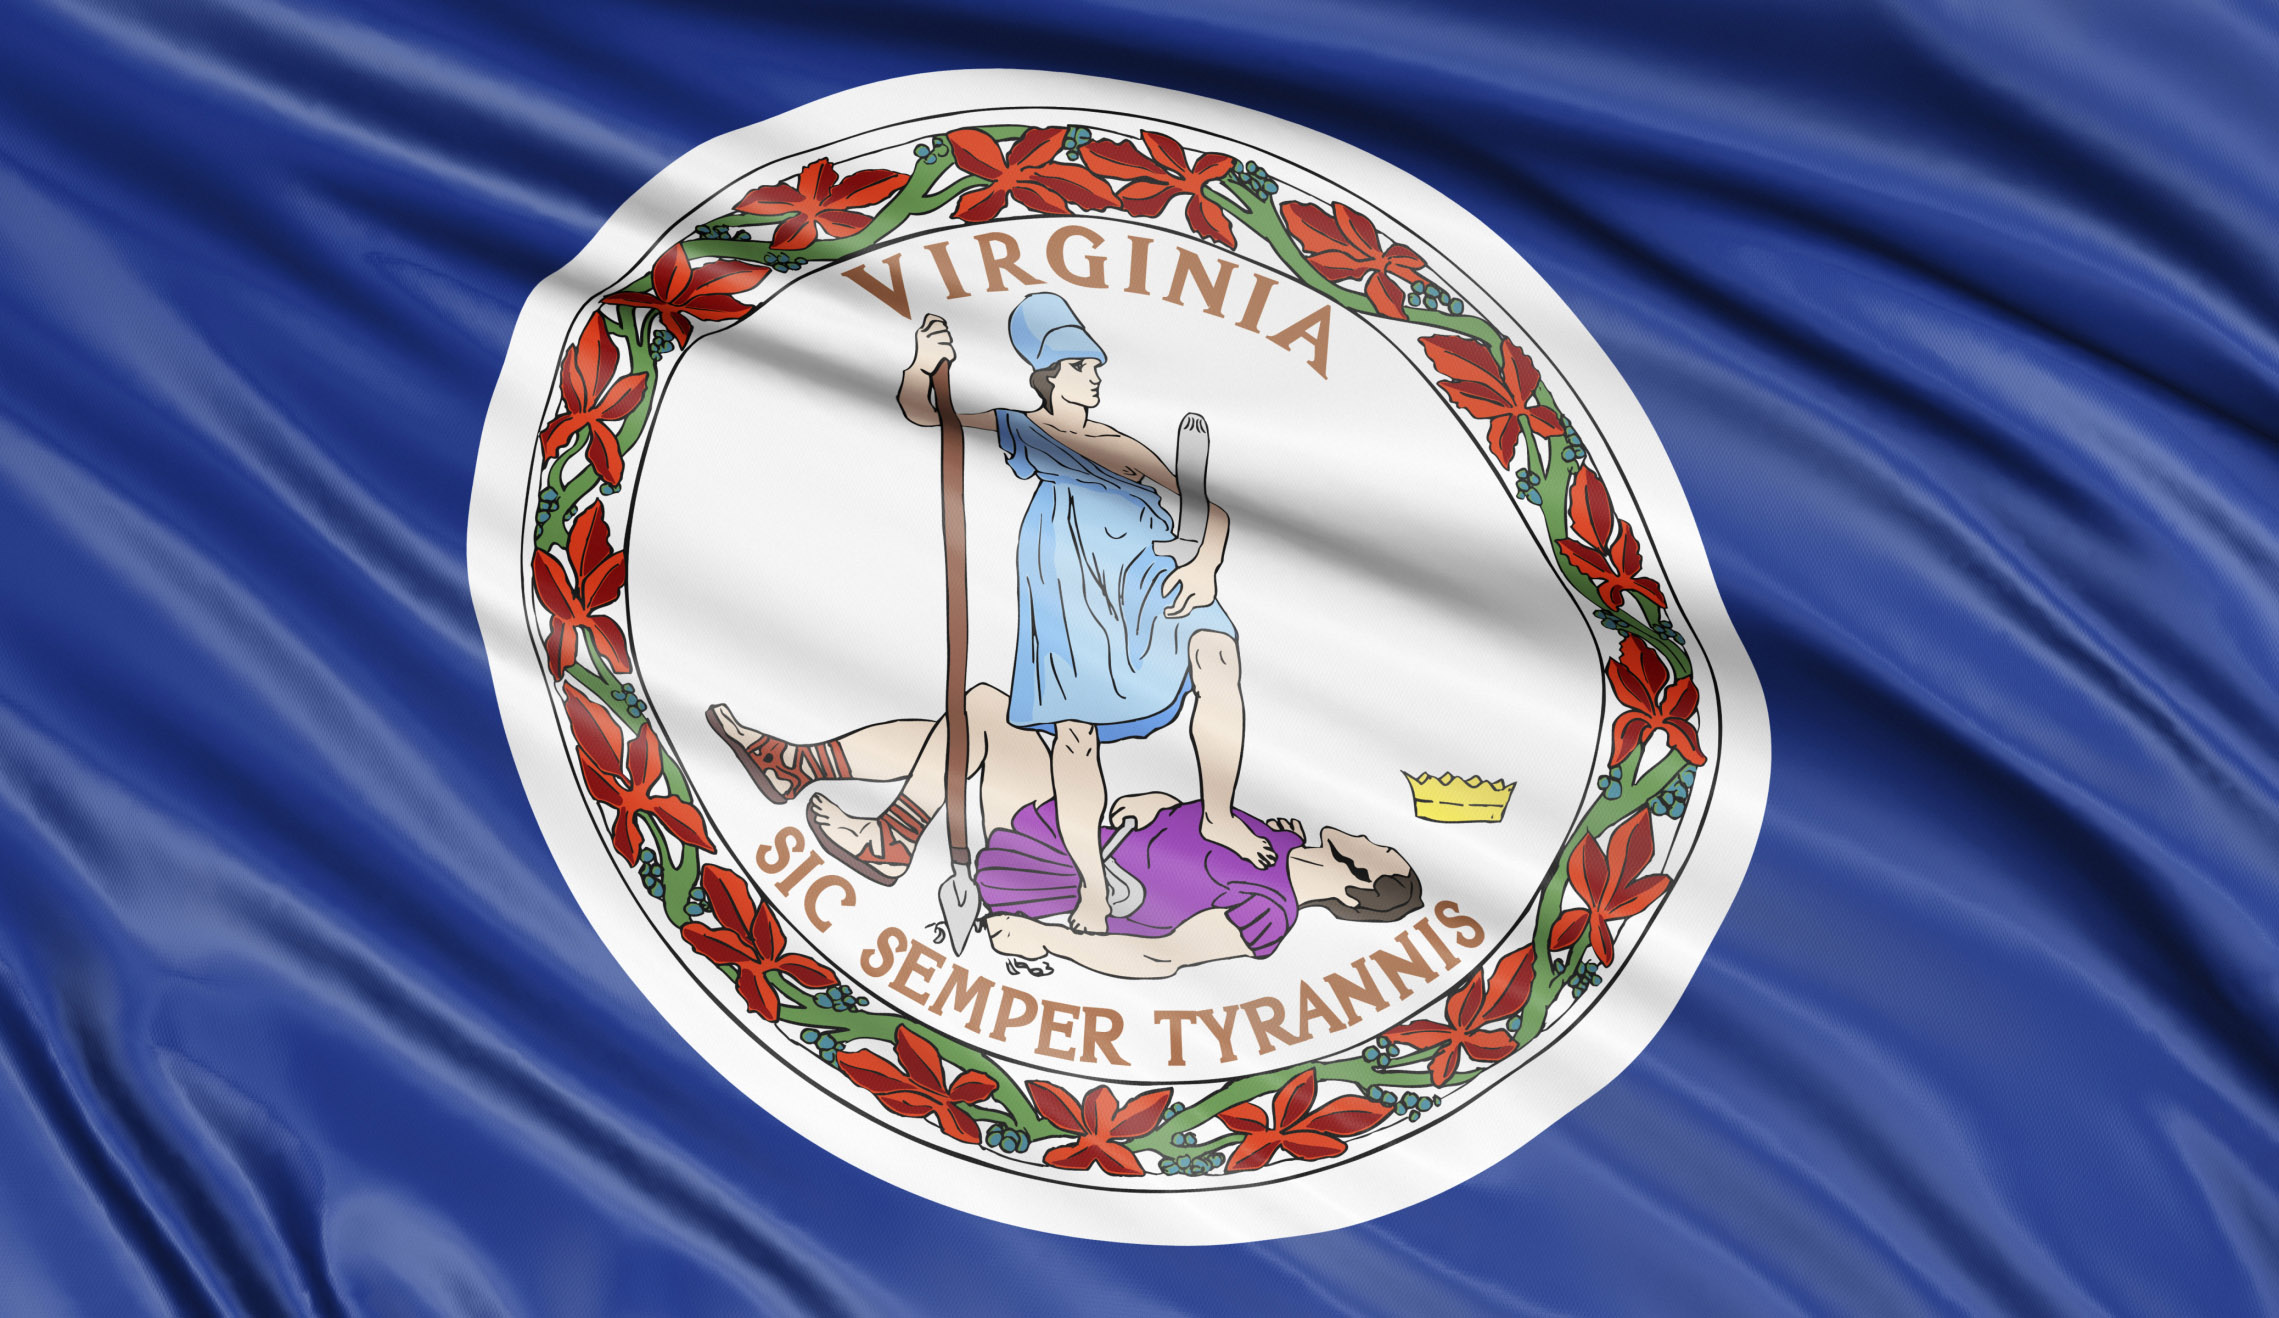 Virginia slips again among CNBC’s best states for business